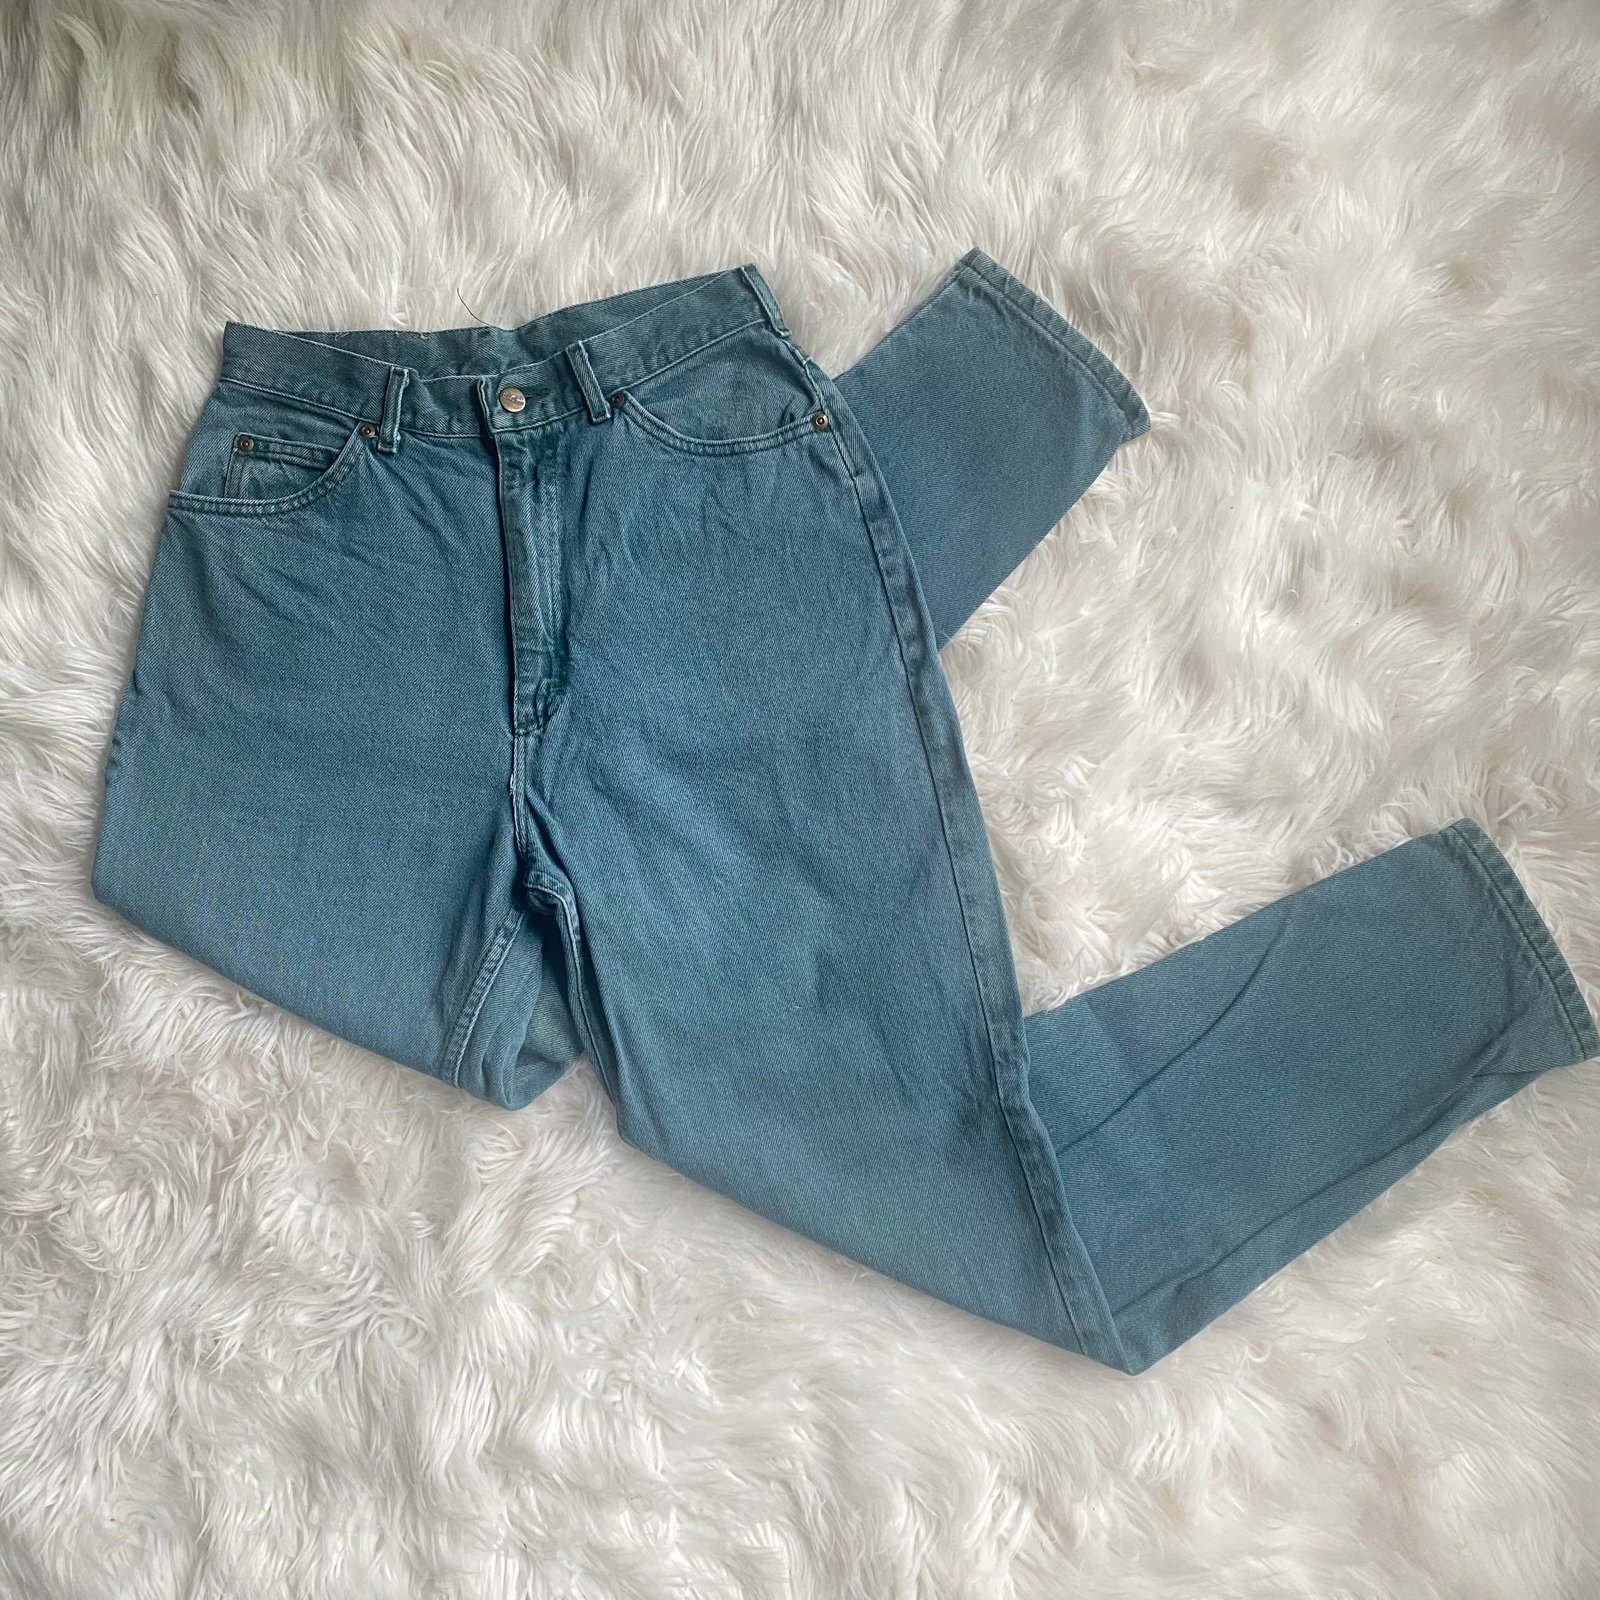 High quality L.L. Bean vintage mom jean inqBsQhU3 Outle